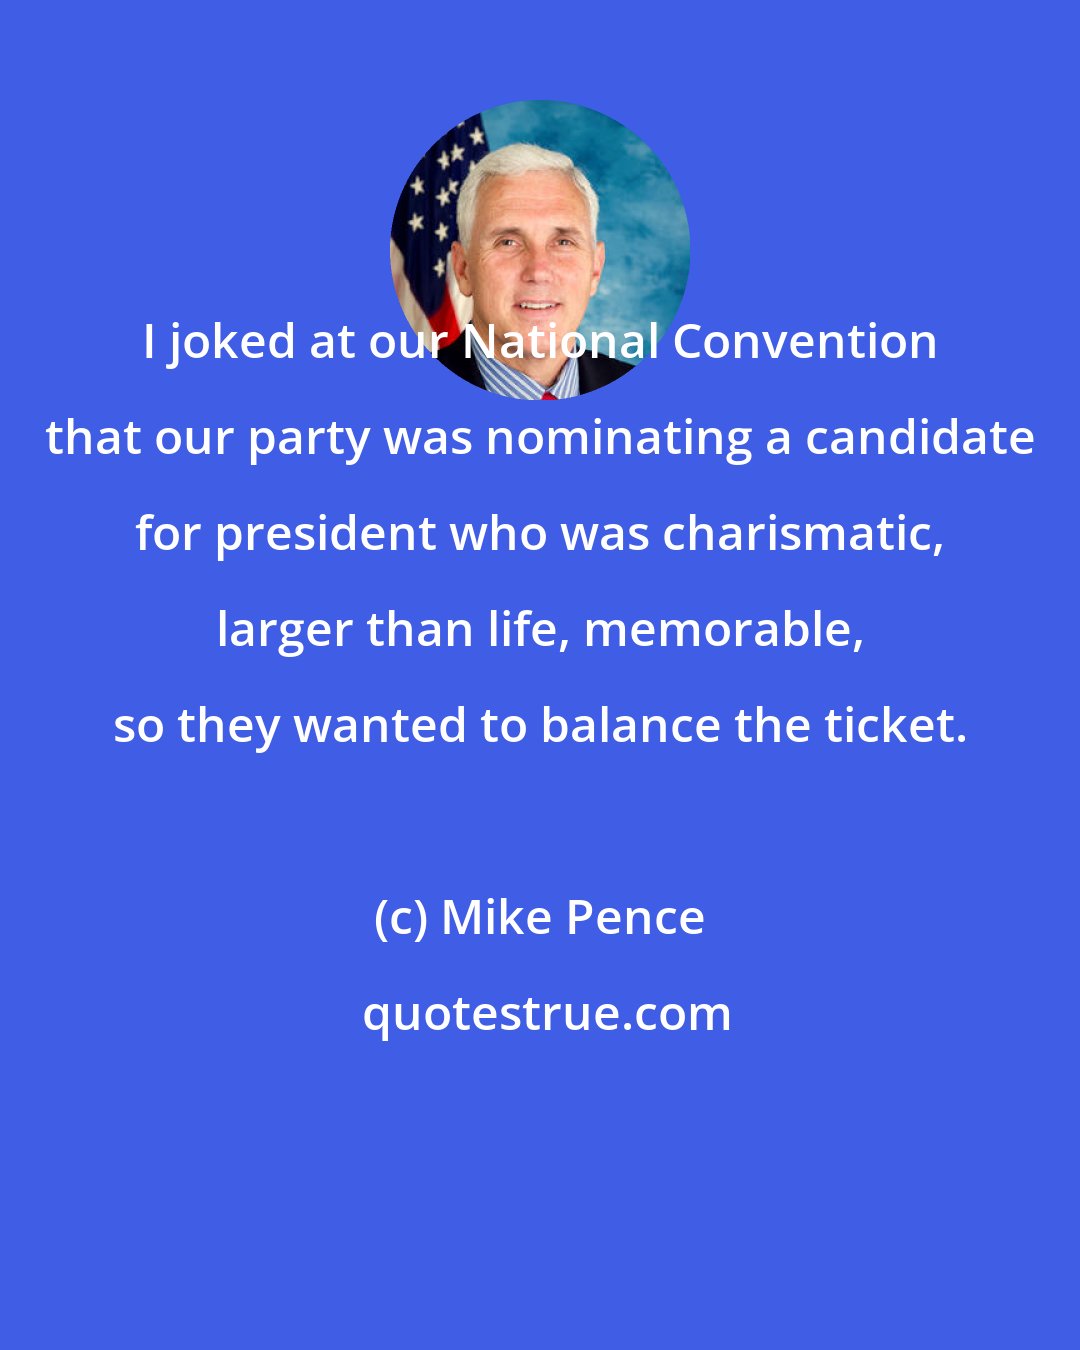 Mike Pence: I joked at our National Convention that our party was nominating a candidate for president who was charismatic, larger than life, memorable, so they wanted to balance the ticket.